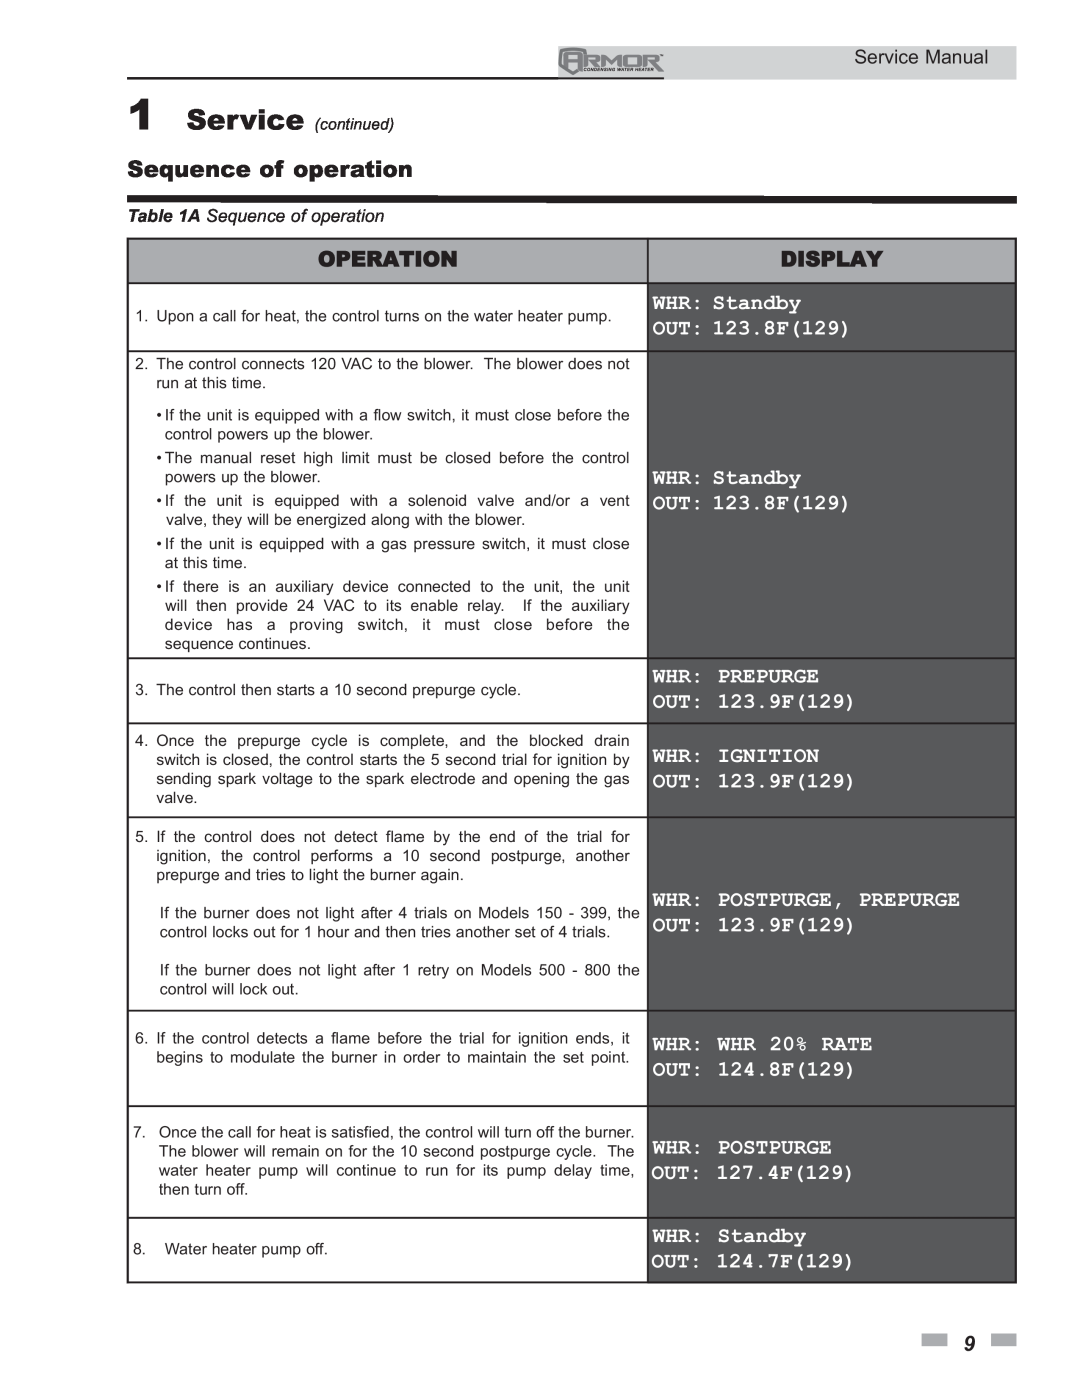 Lochinvar 150 - 800 service manual Operation, Display, Sequence of operation 